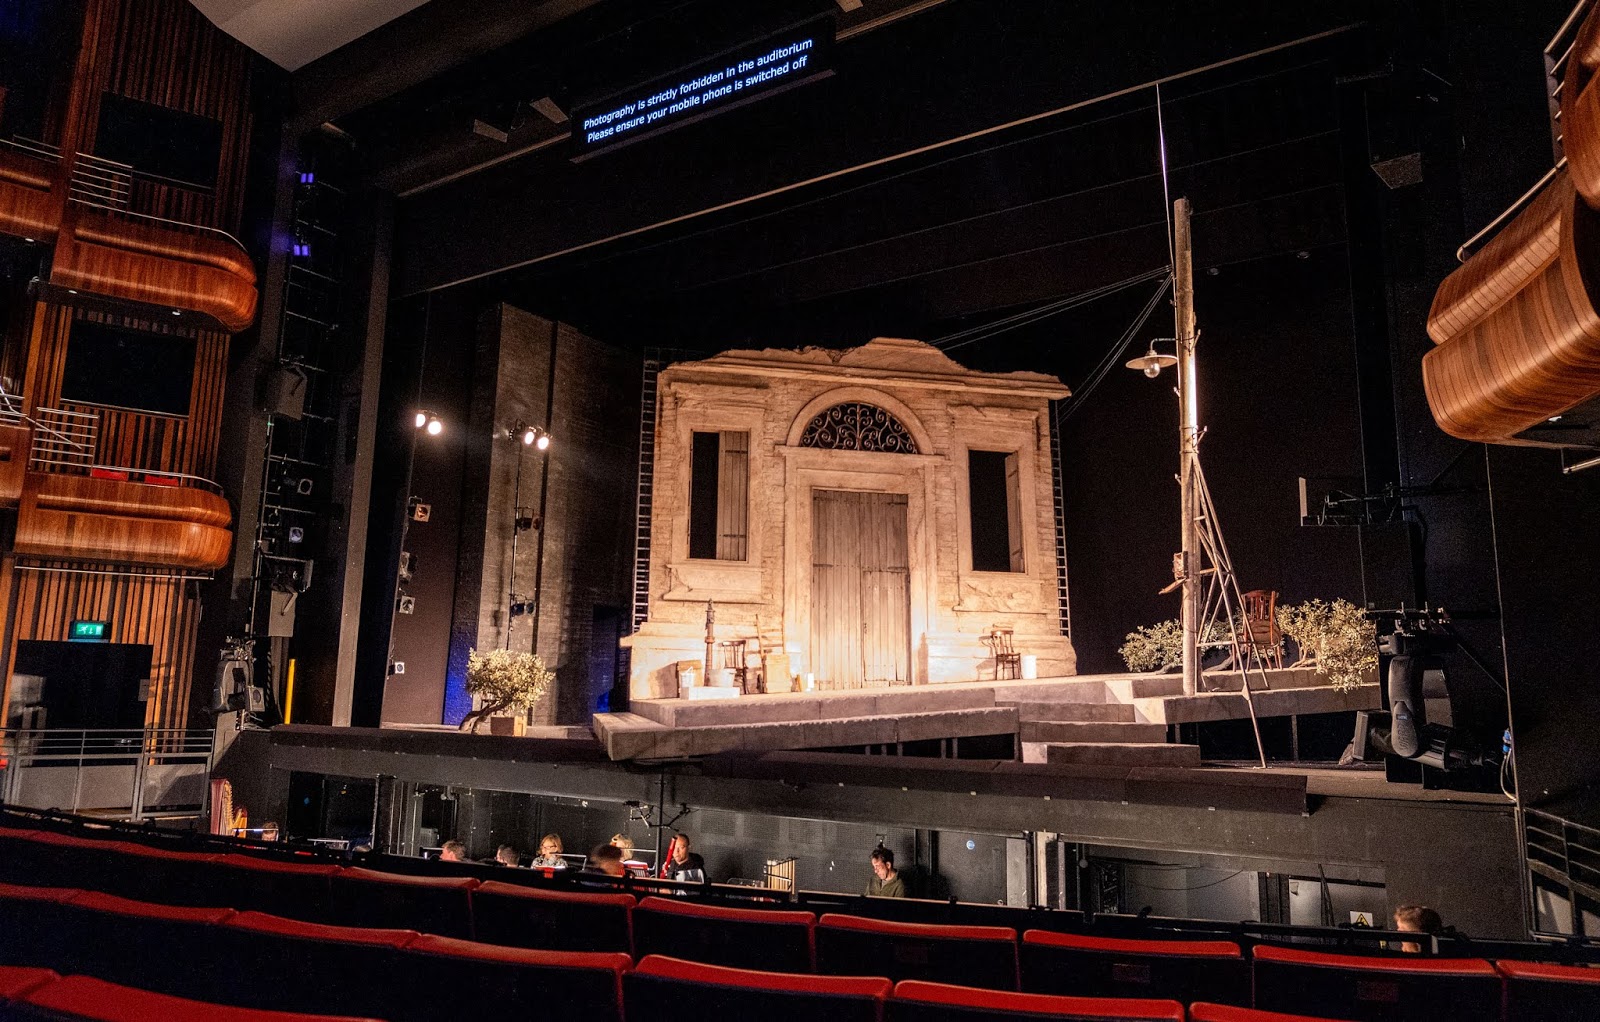 Glyndebourne's set for L'elisir d'amore at the Marlowe Theatre, Canterbury